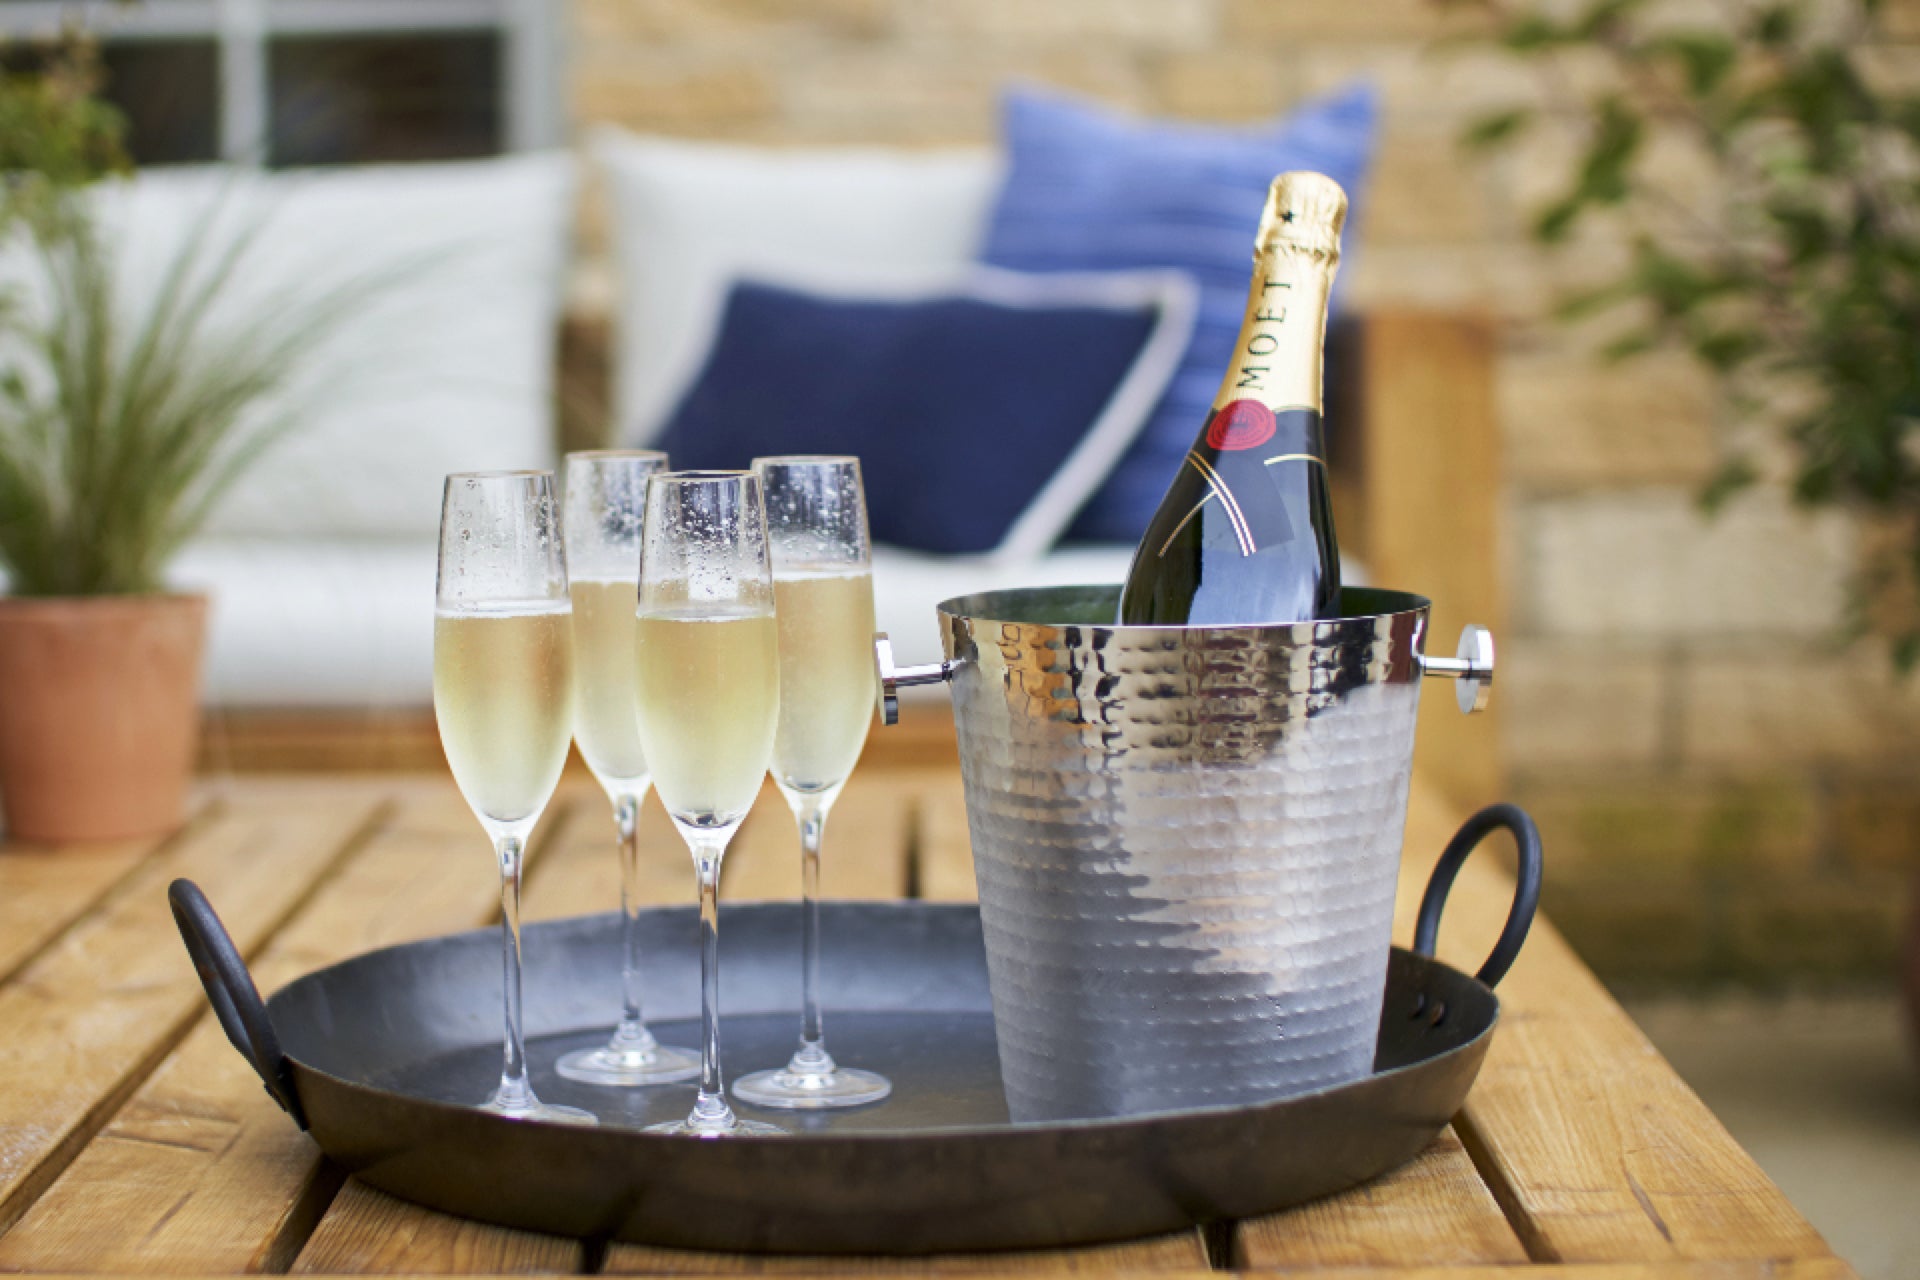 Moet champagne in competition to win a house